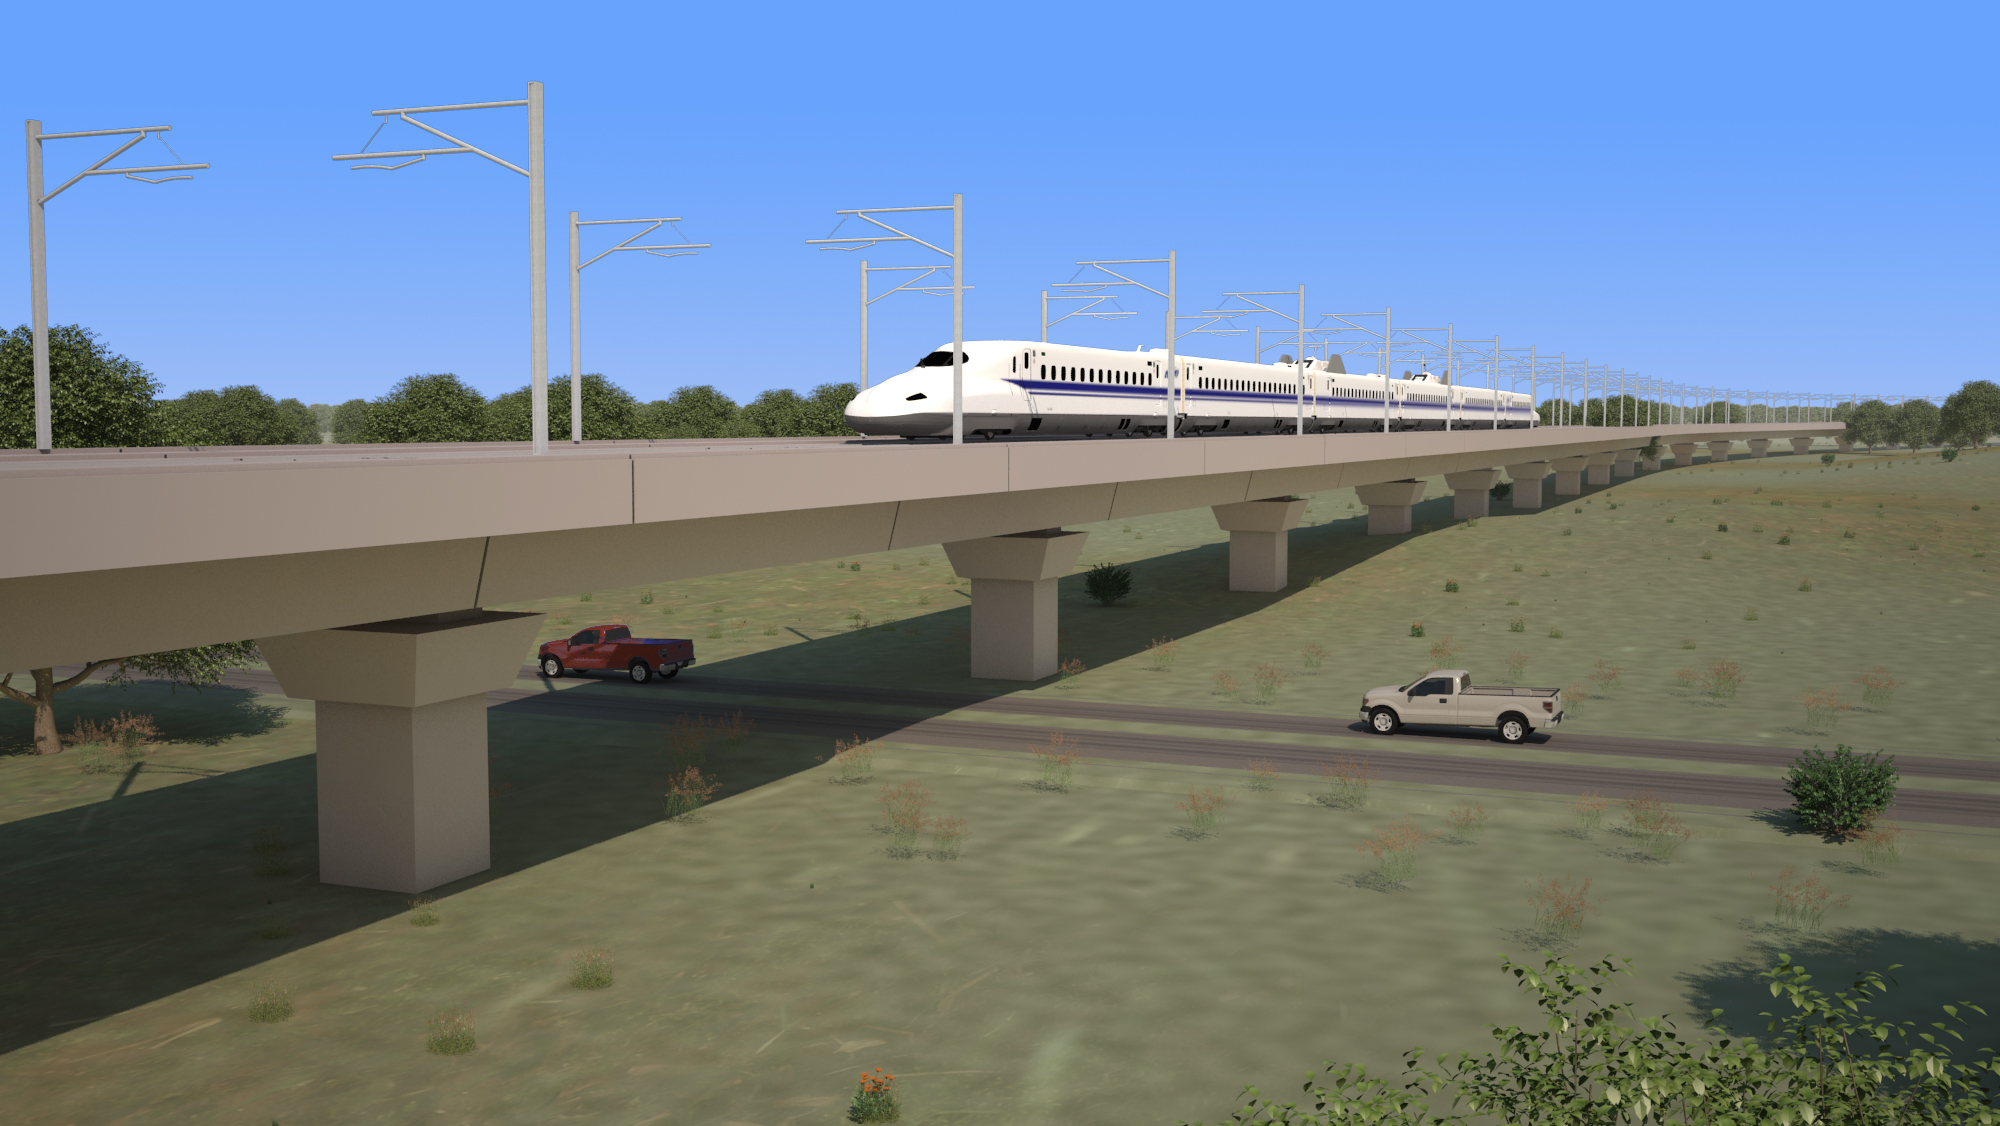 PHOTO: Houston/Dallas rural viaduct and high-speed train. Photo courtesy of Texas Central Partners